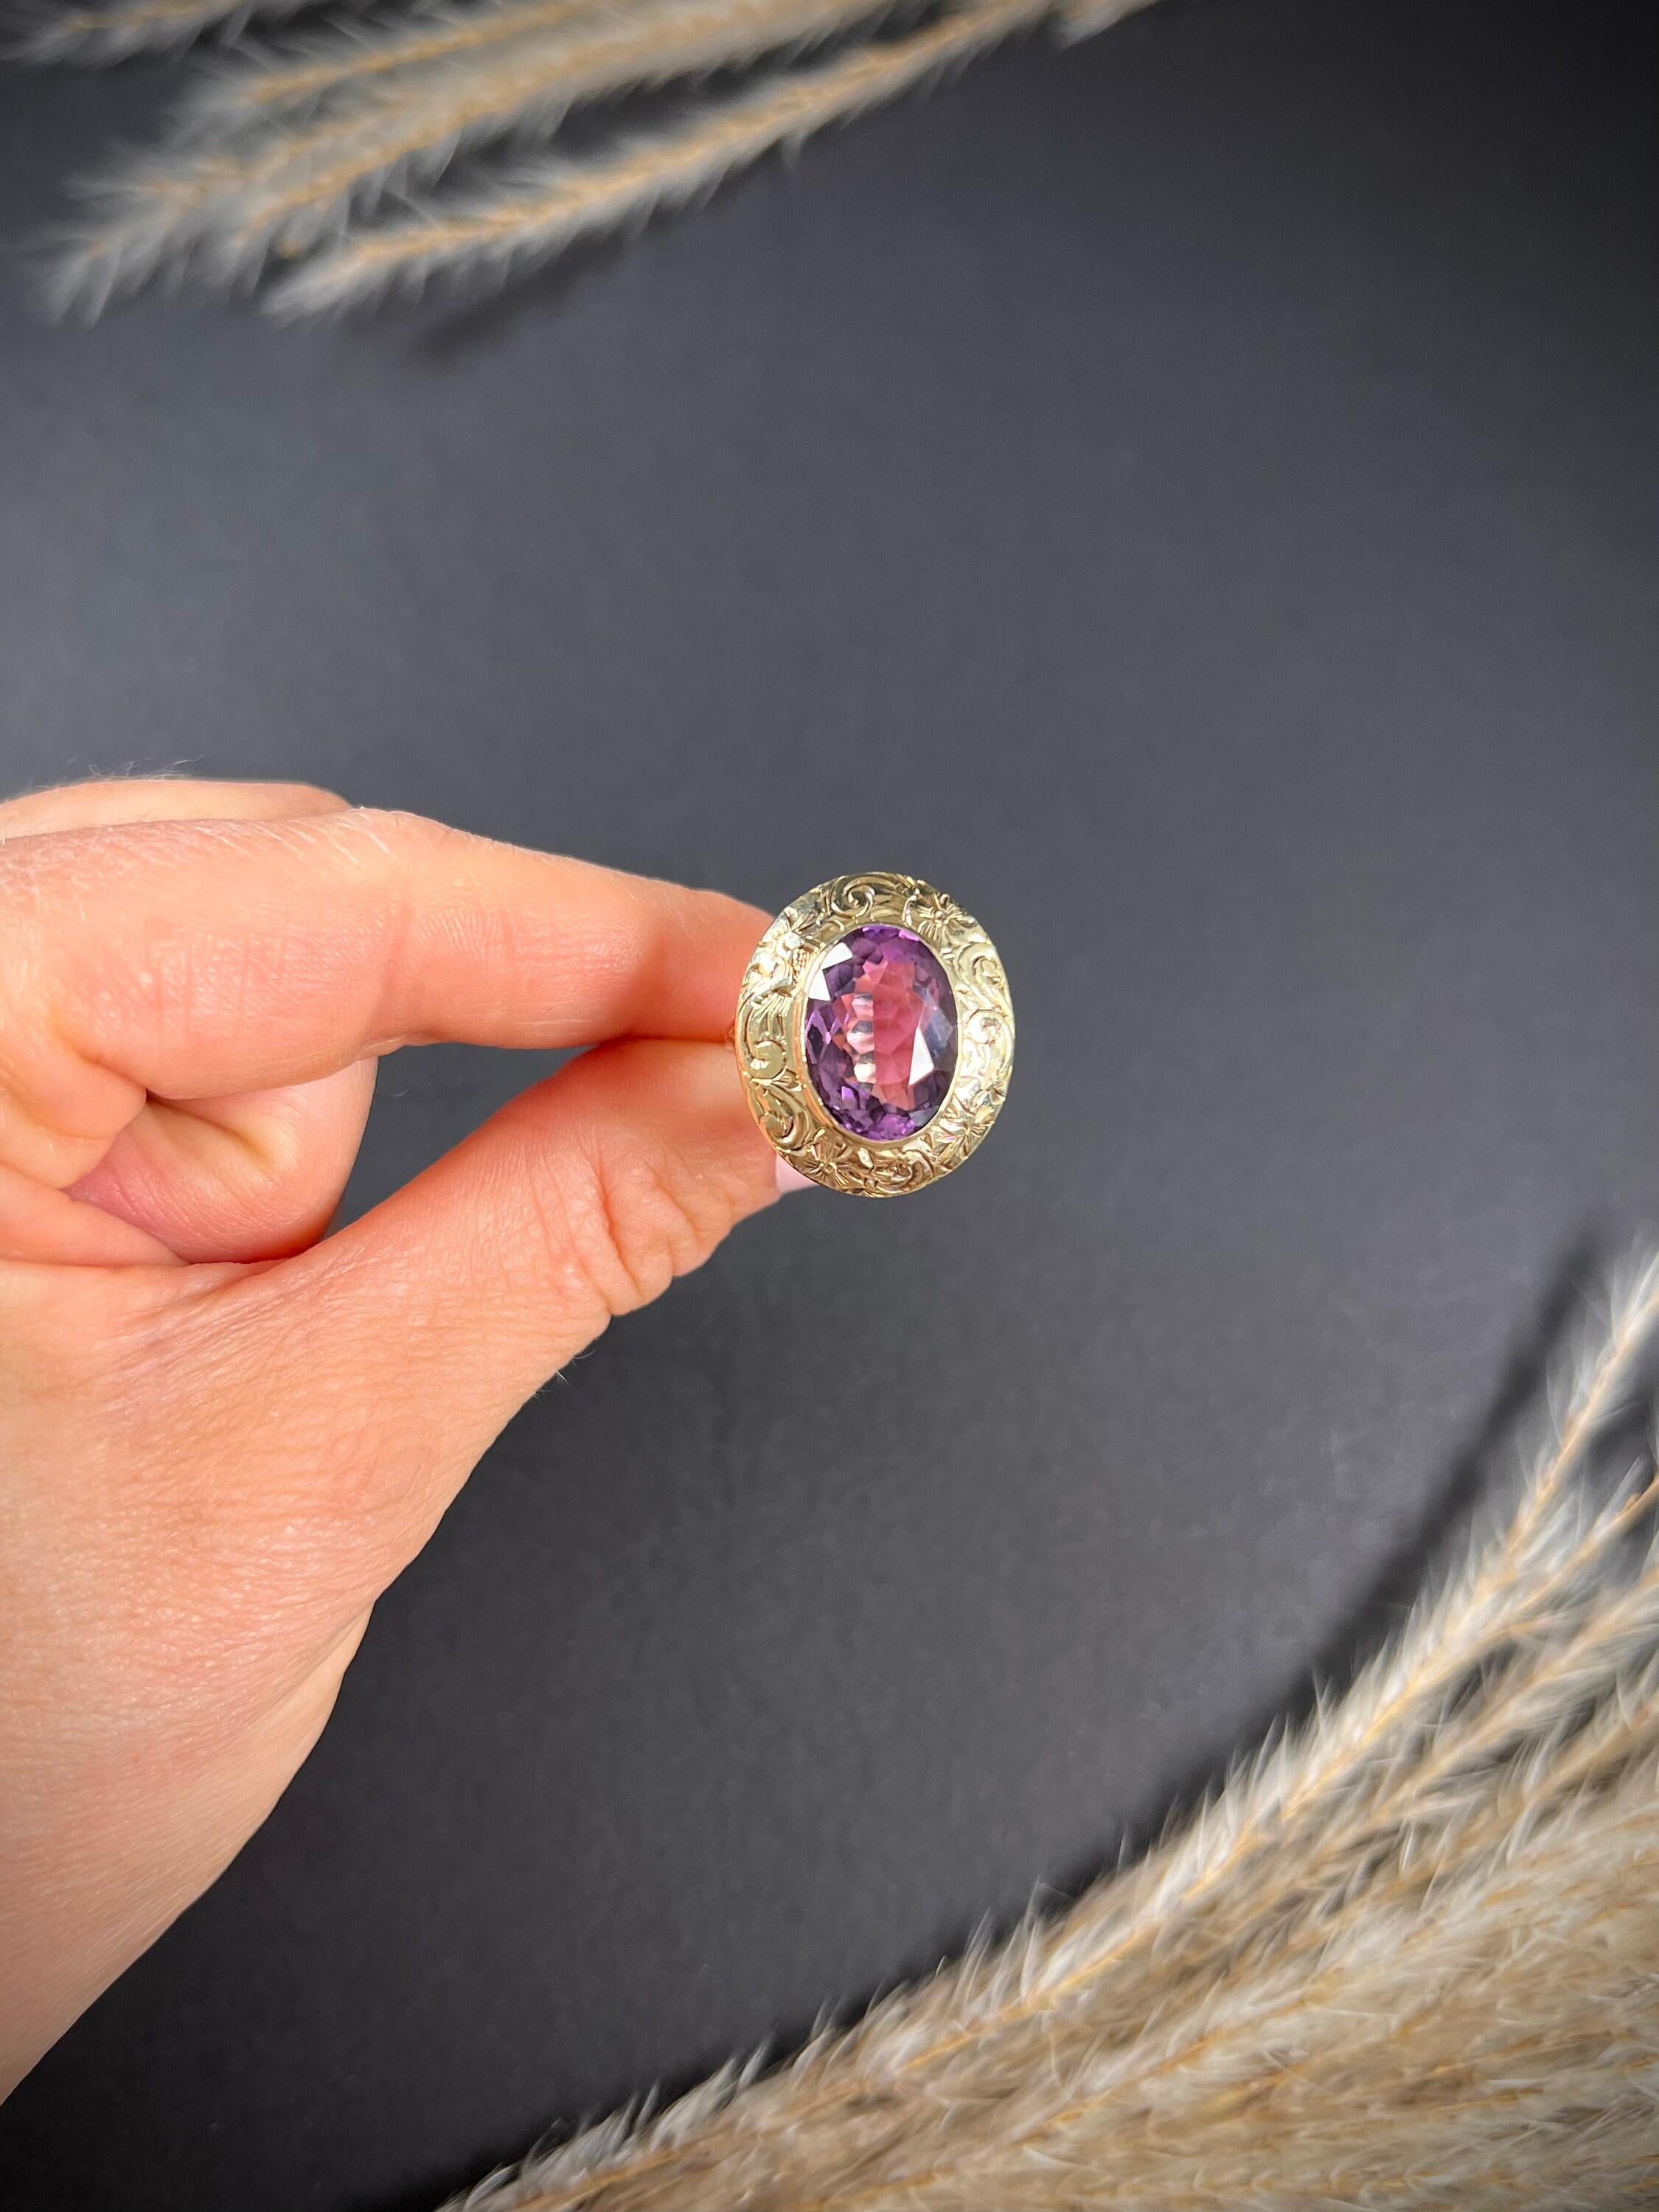 Antique 14ct Gold Victorian Oval Faceted Amethyst Ring In Good Condition For Sale In Brighton, GB